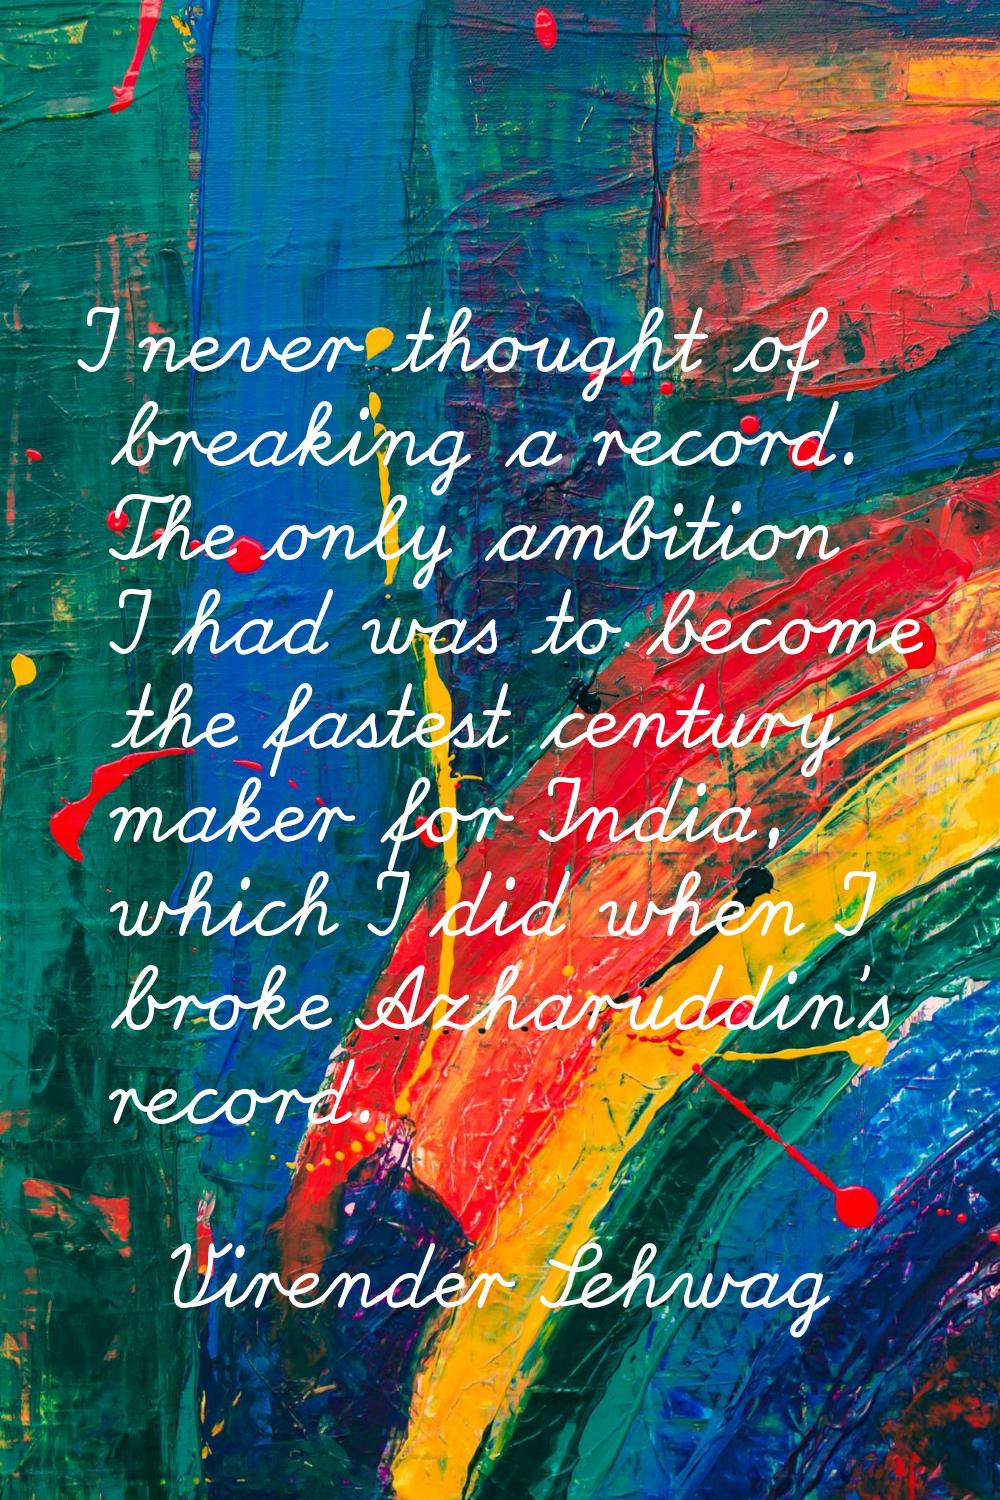 I never thought of breaking a record. The only ambition I had was to become the fastest century mak